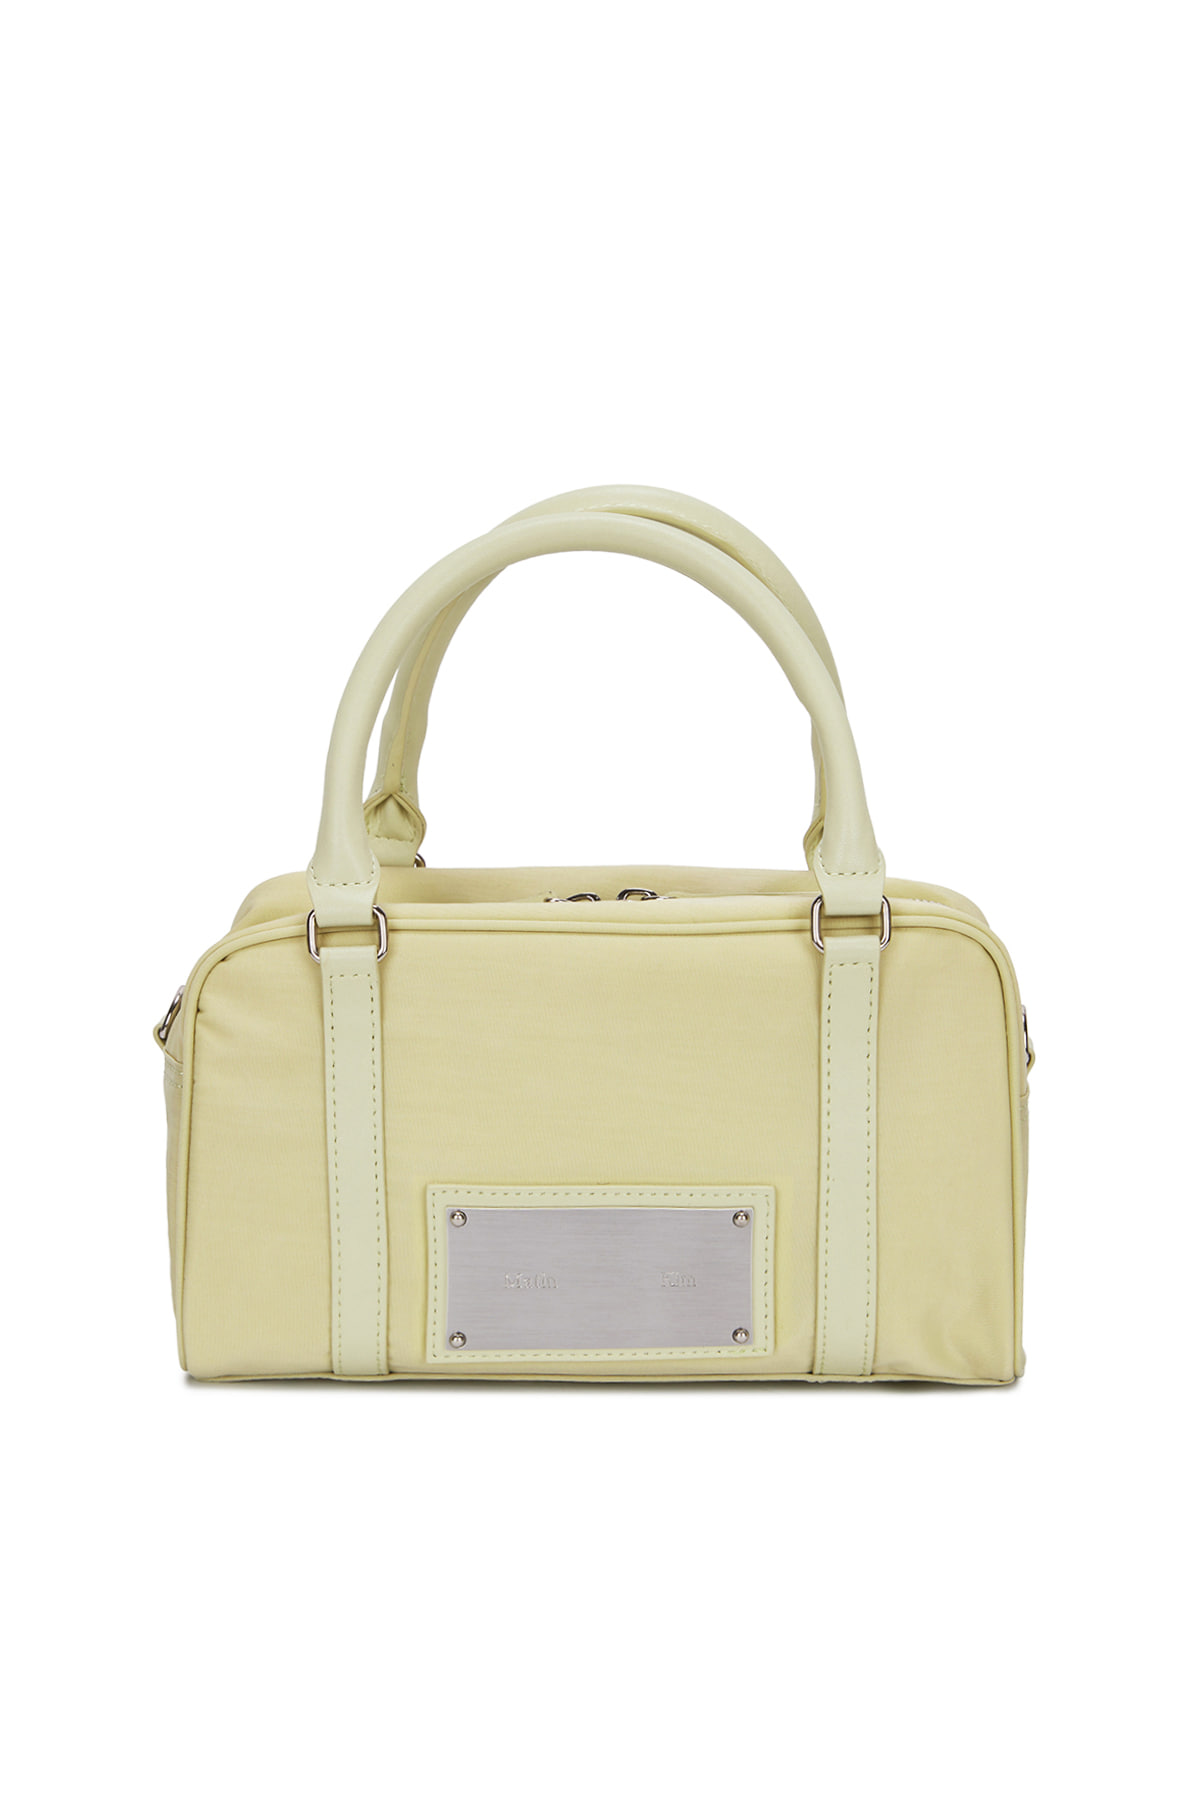 BABY SPORTY TOTE BAG IN BEIGE